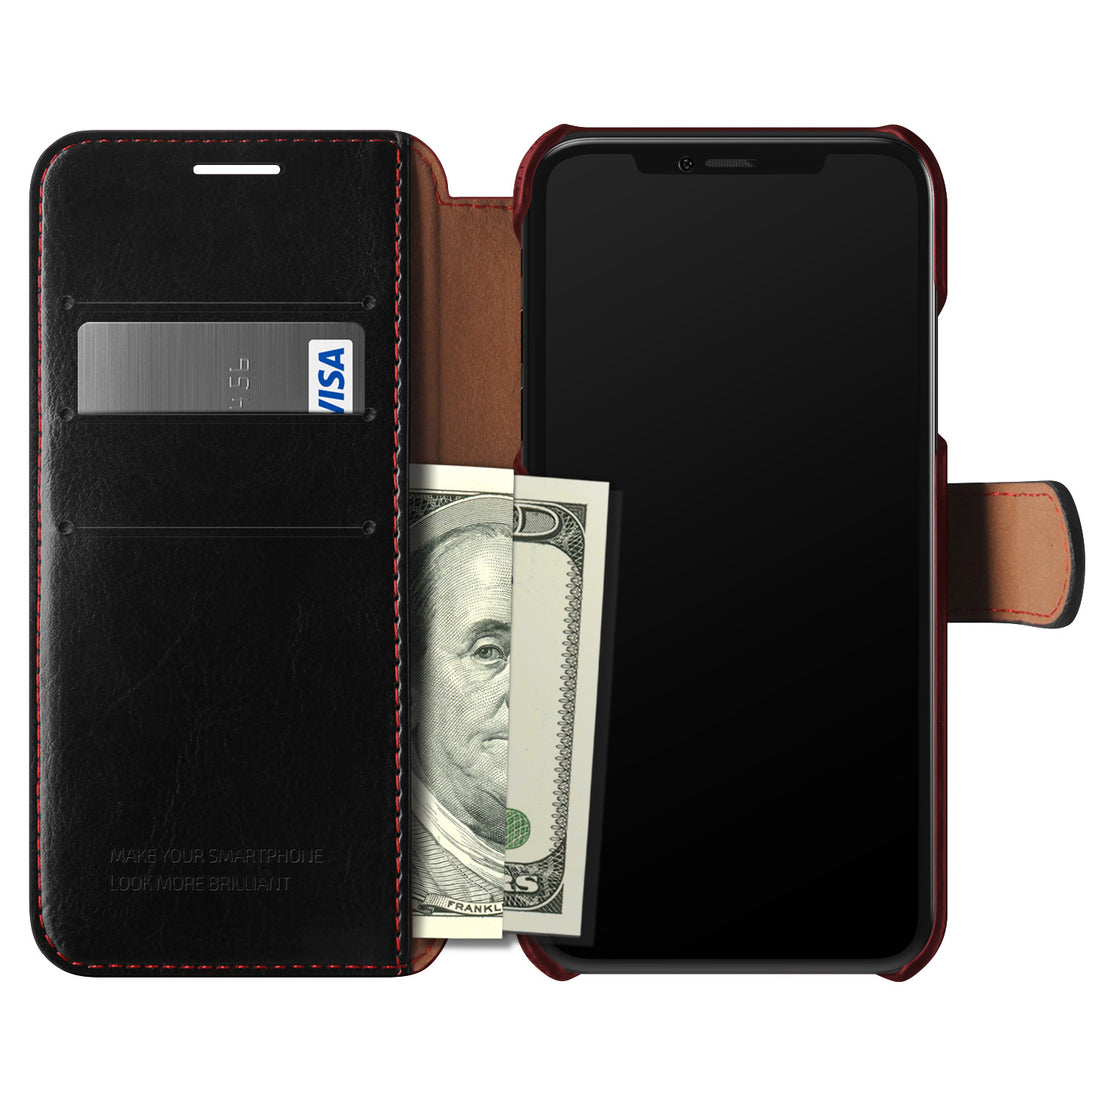 Apple iPhone 8 rugged Glide wallet case with multiple durable and convenient card slot with sleek minimalist look by VRS 